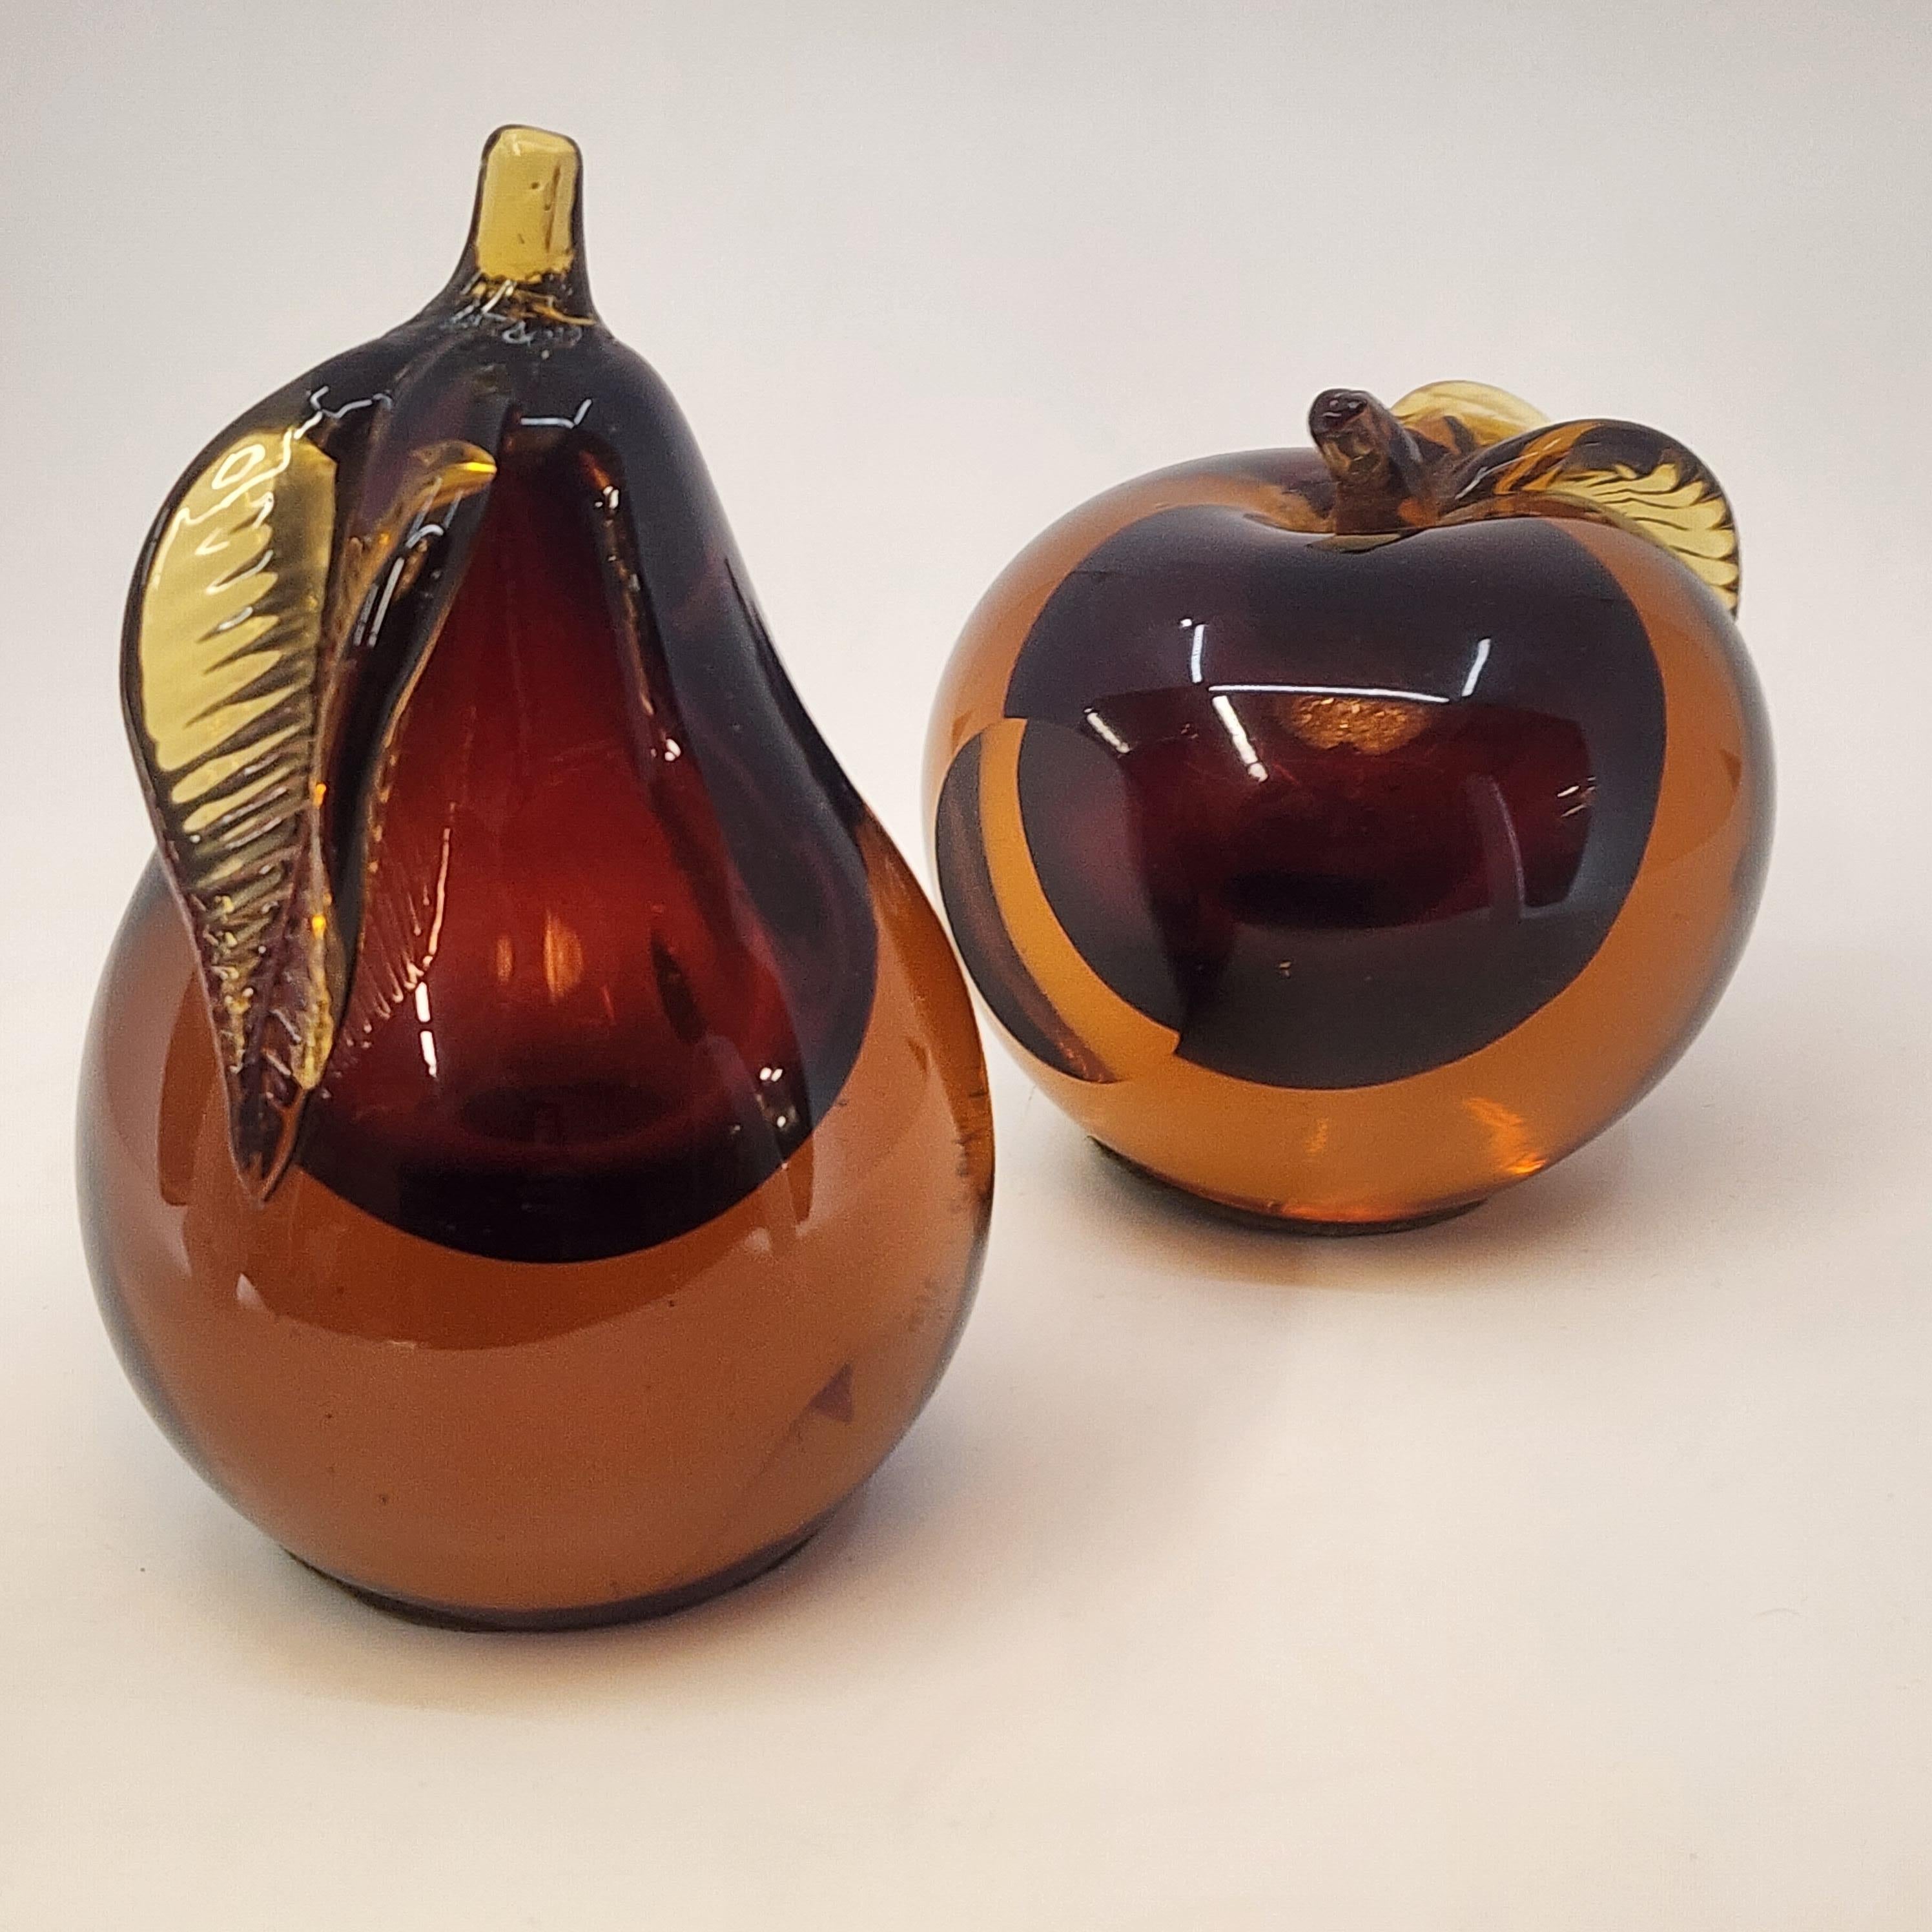 A striking pair of mic century hand blown Murano glass bookends by Barbini.  Cased glass or as the Italians call sommerso (submerged in Italian) is when two layers of glass are put inside of each other.  Beautifully made and has old wool felt on the